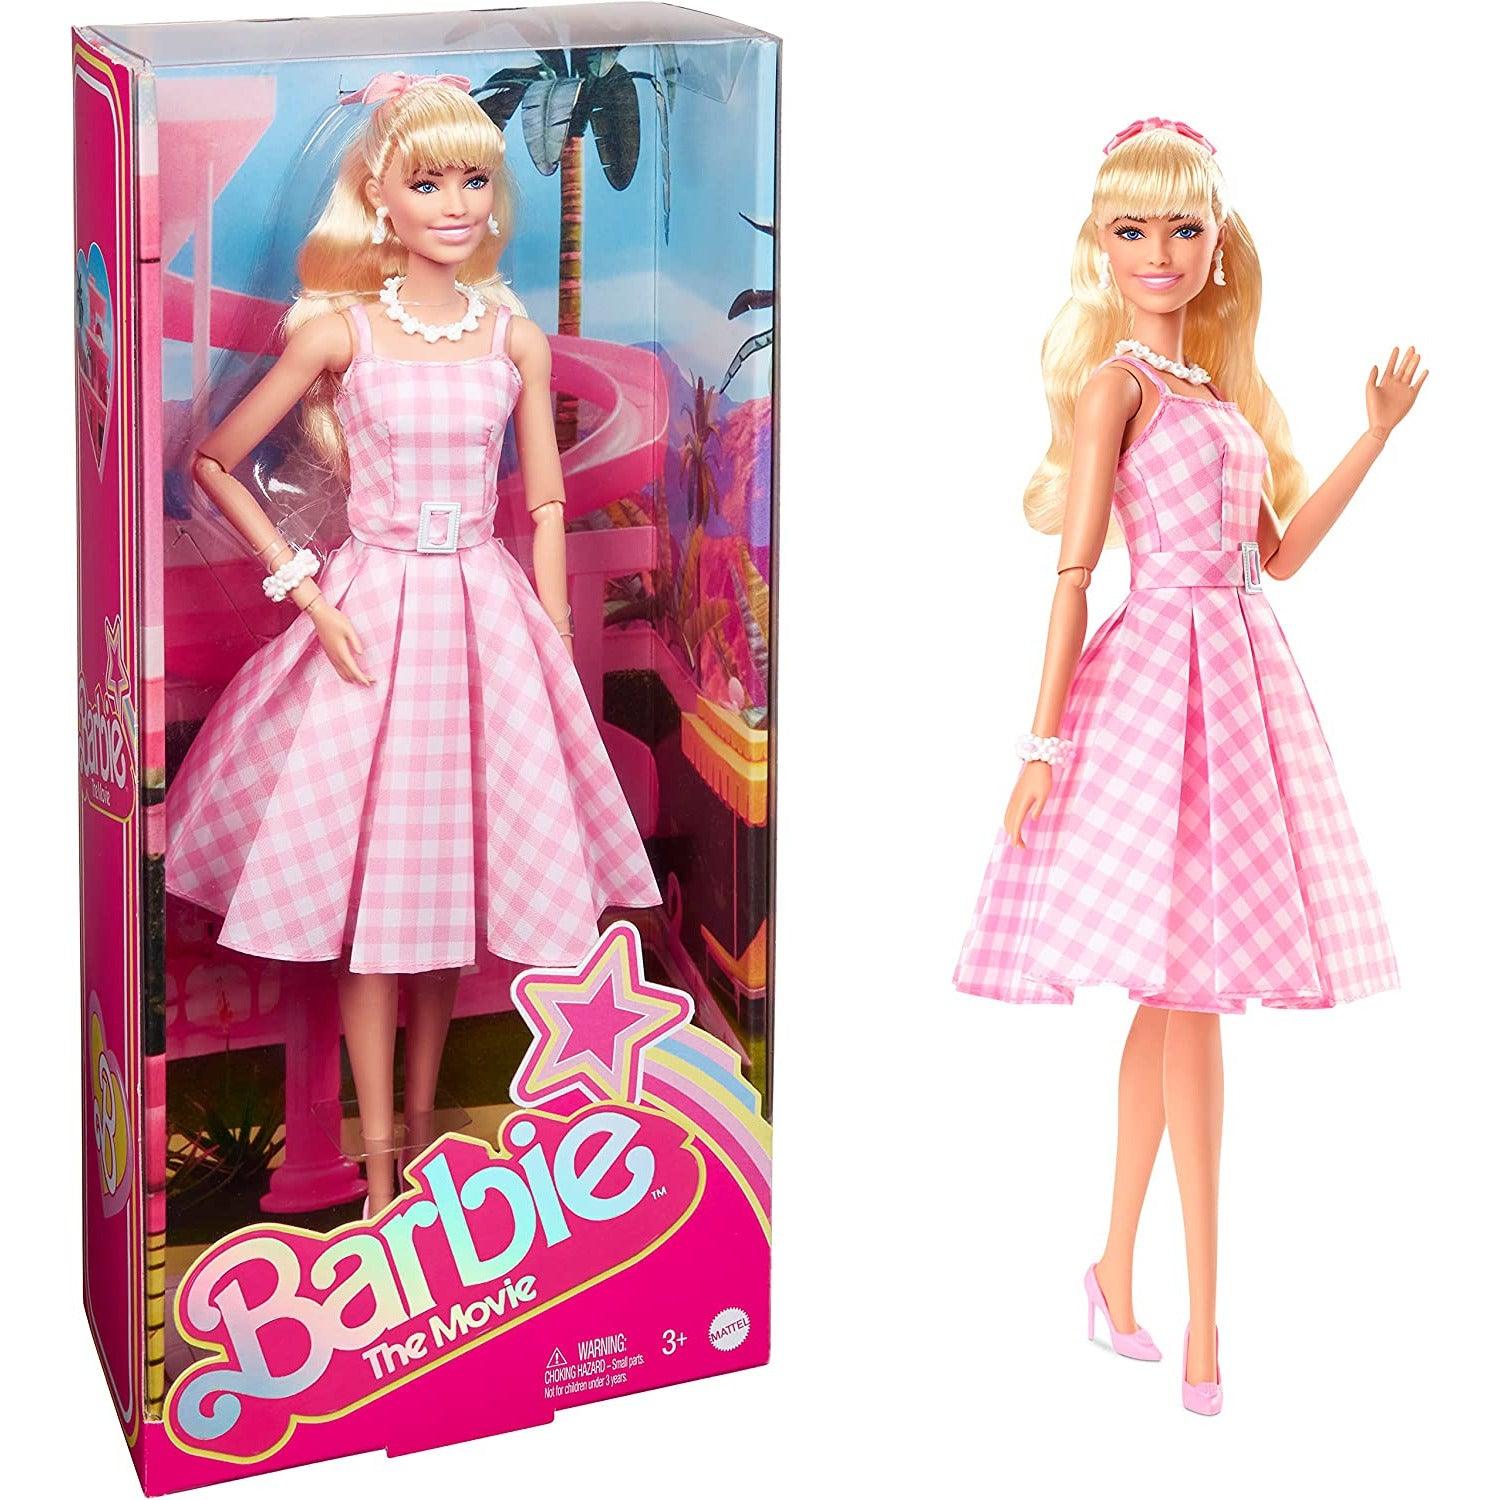 Barbie The Movie Doll, Collectible Doll Wearing Pink and White Gingham Dress with Daisy Chain Necklace - BumbleToys - 5-7 Years, Barbie, Boys, Disney Princess, dup-review-publication, Fashion Dolls & Accessories, Girls, Mattel